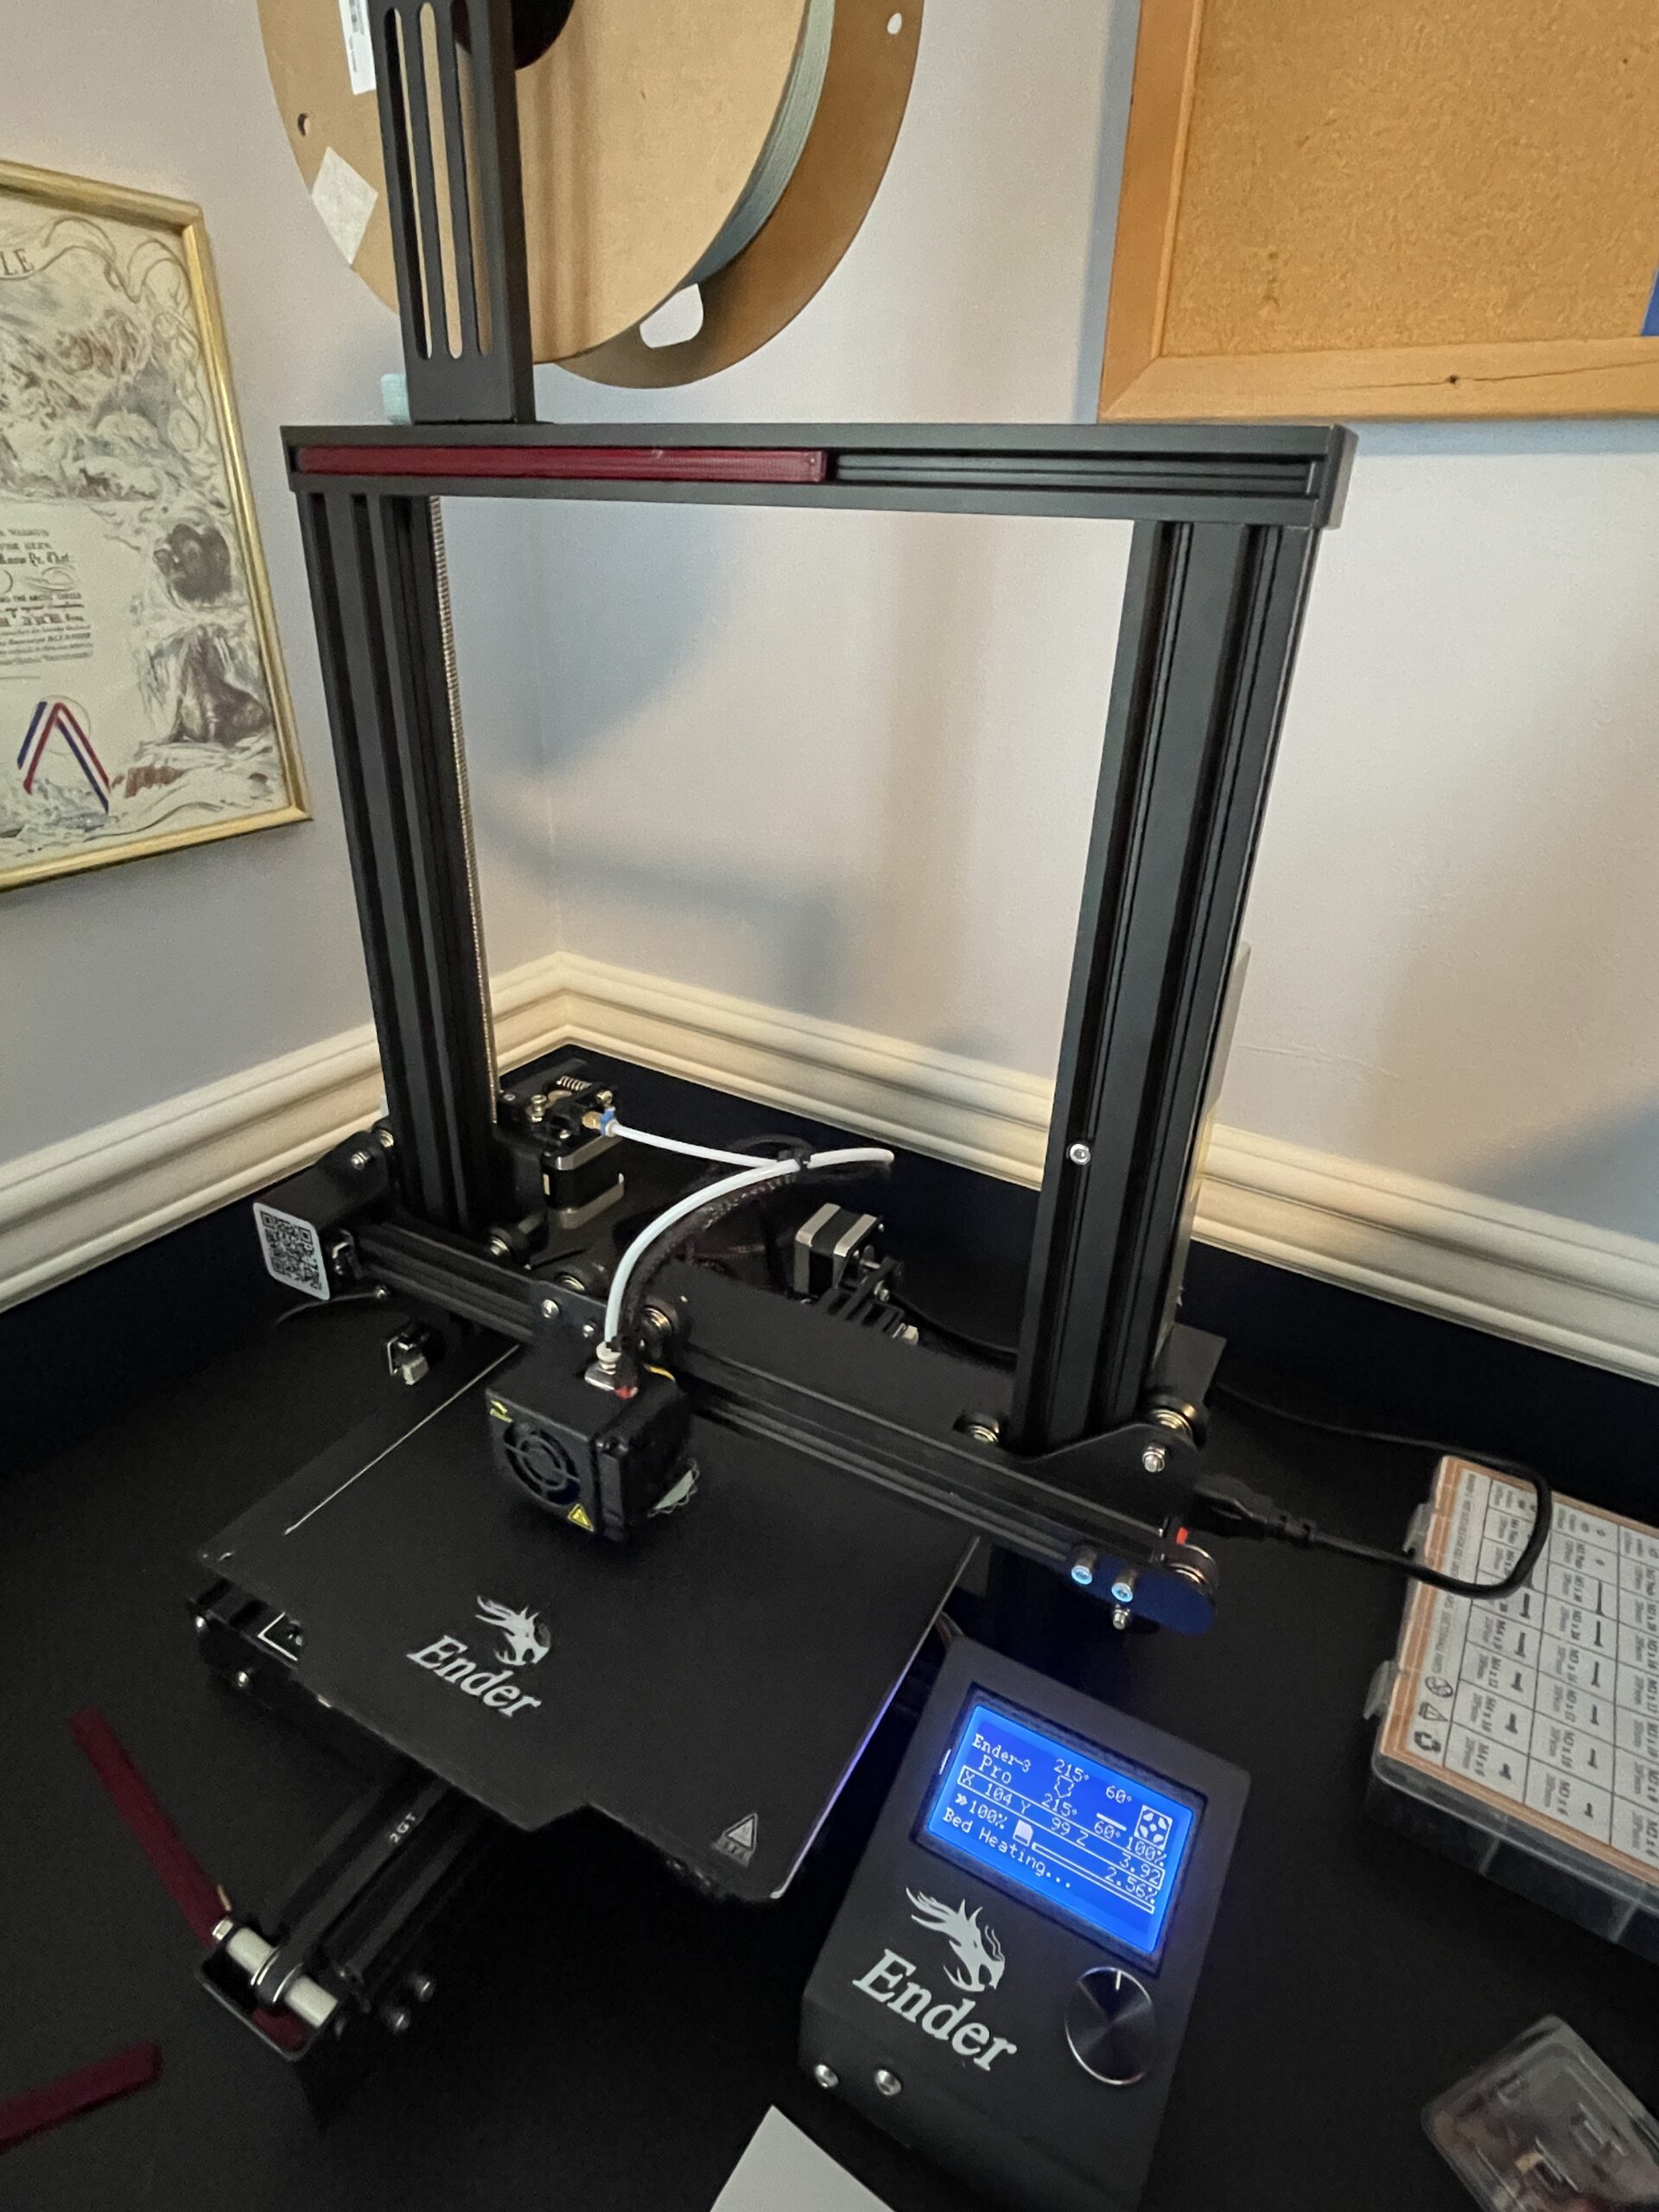 3D Printing Comes to Centreville